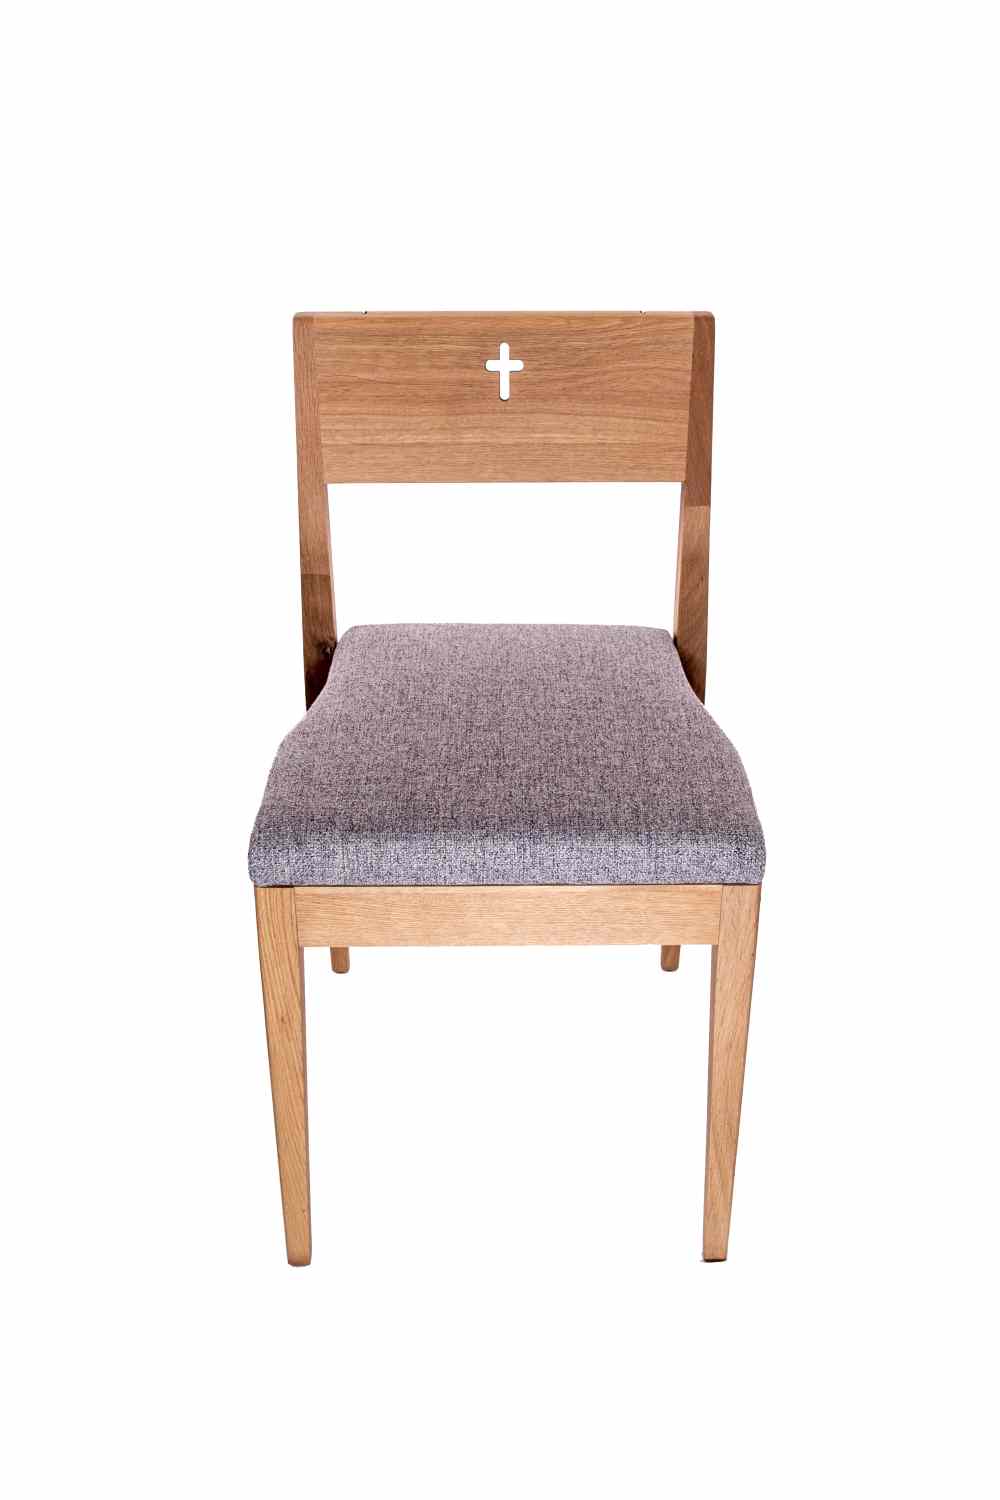 The wooden church seating ZOE with upholstered seat